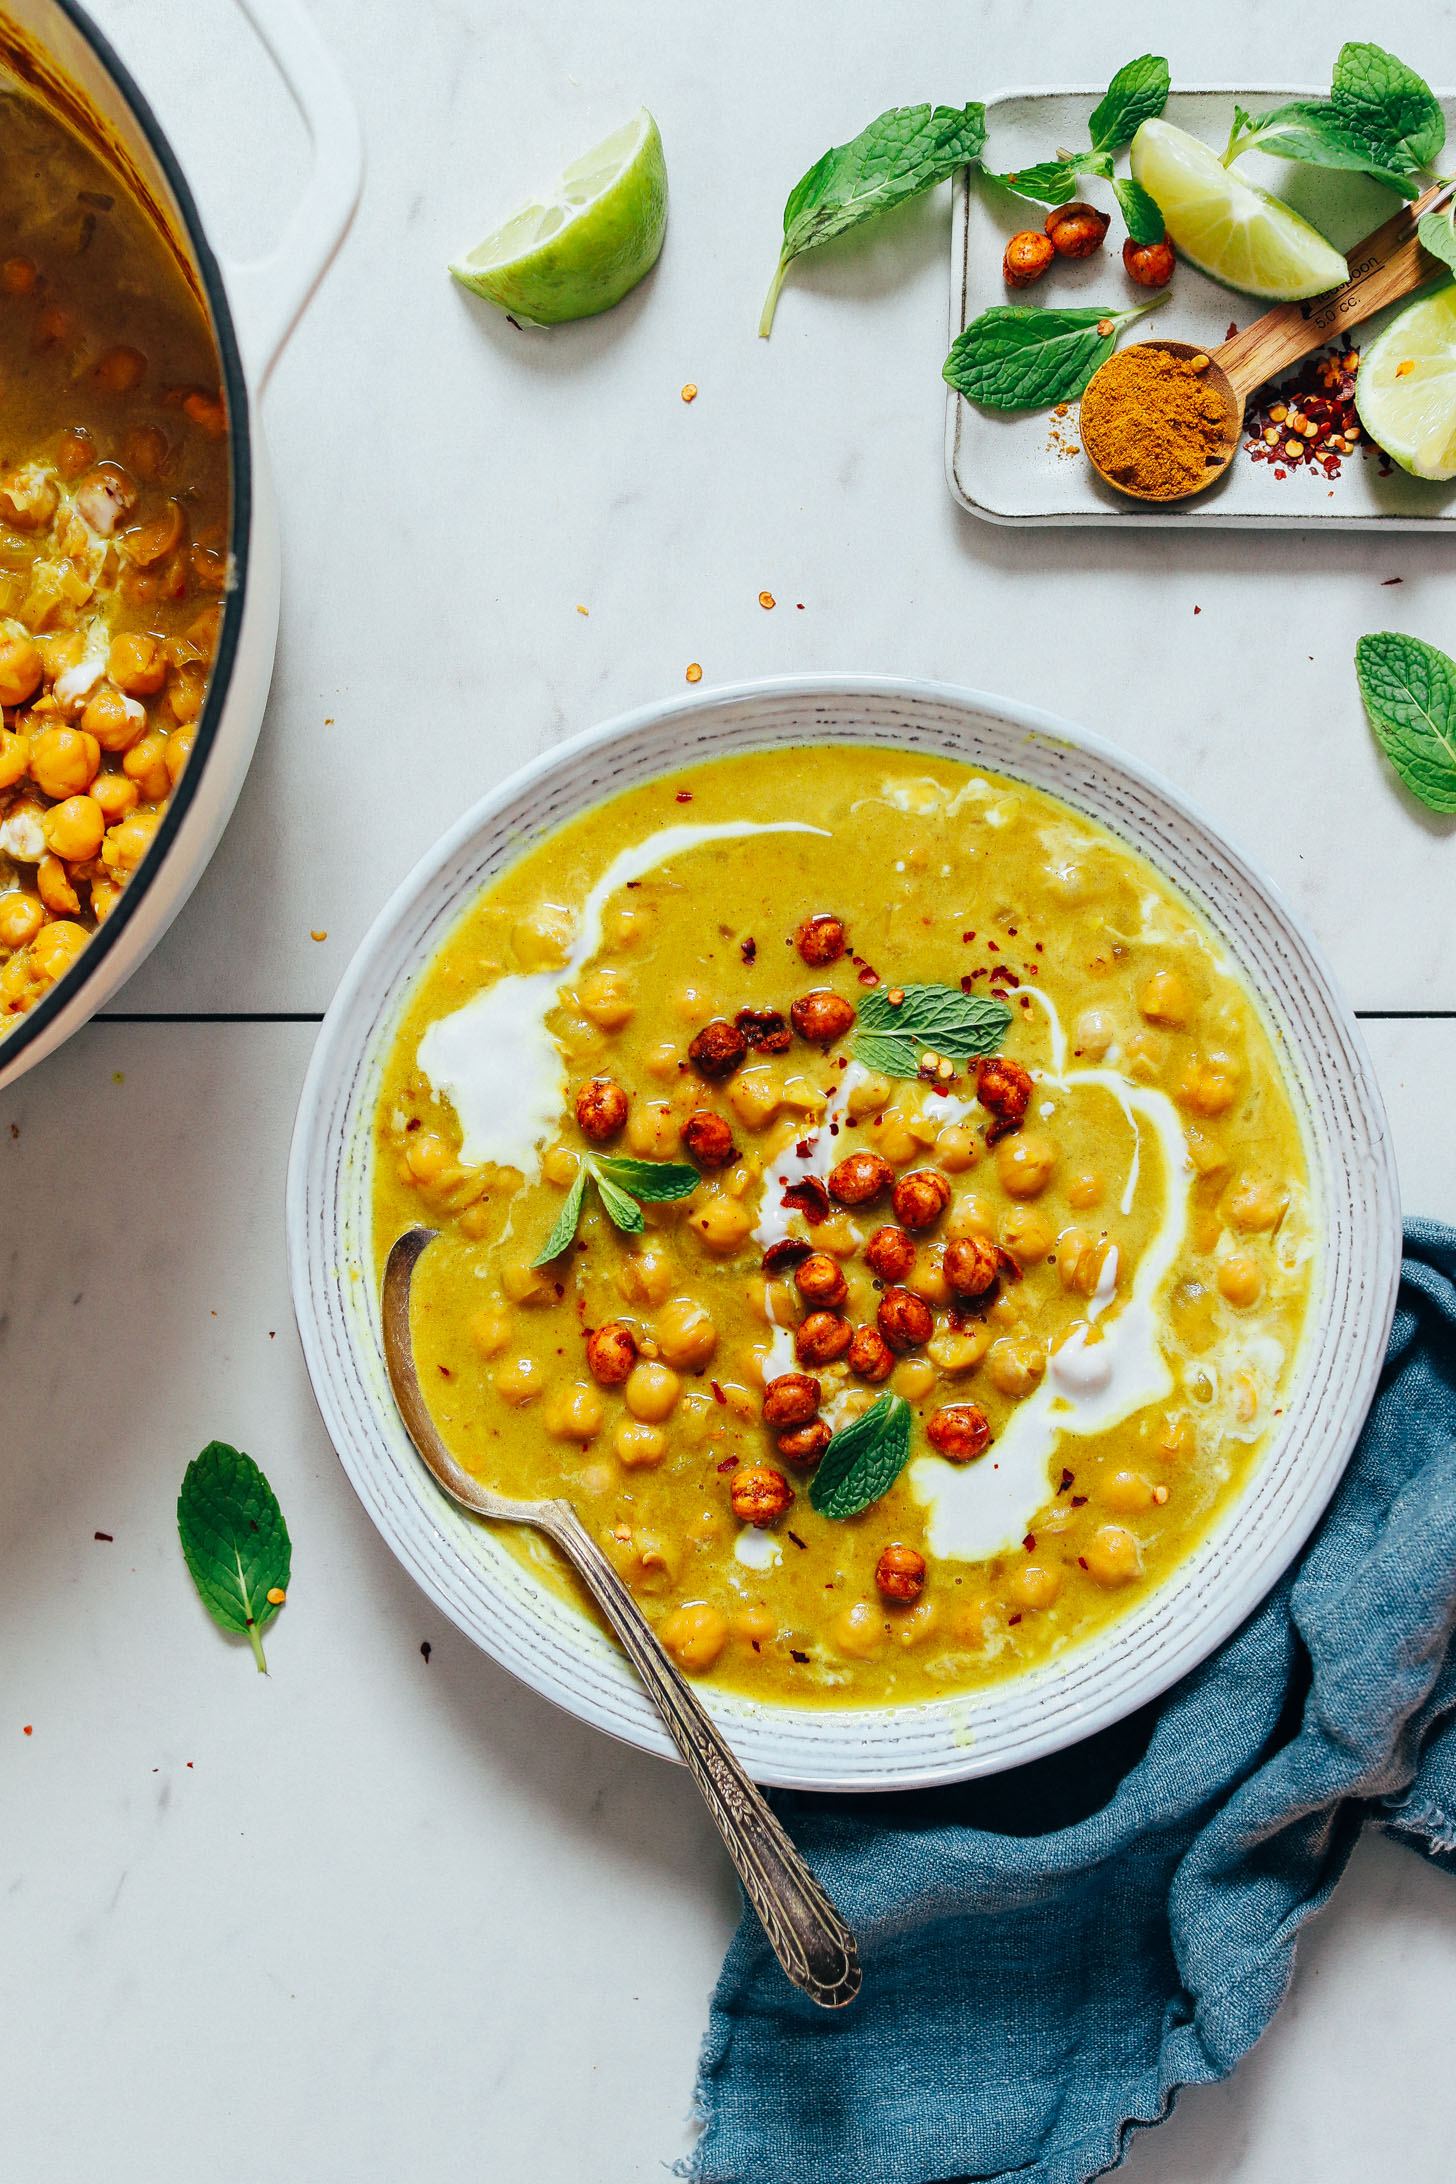 Spoon resting in a bowl of Curried Chickpea Soup topped with fresh cilantro